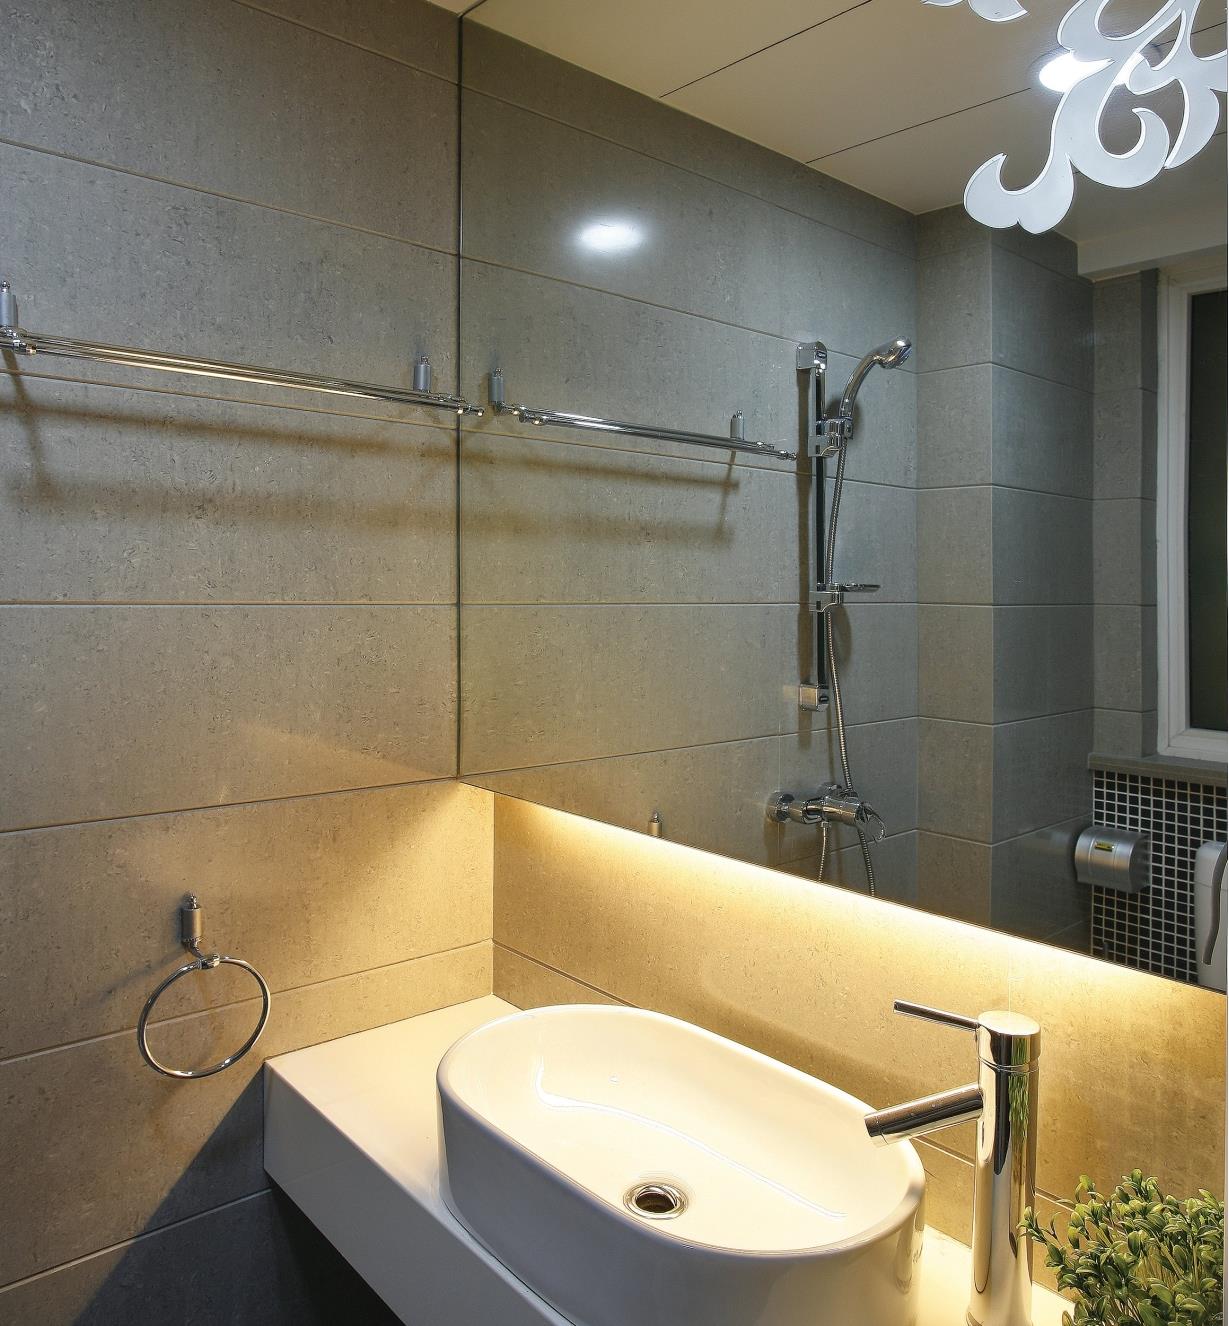 Example of white LED tape lighting used in a bathroom